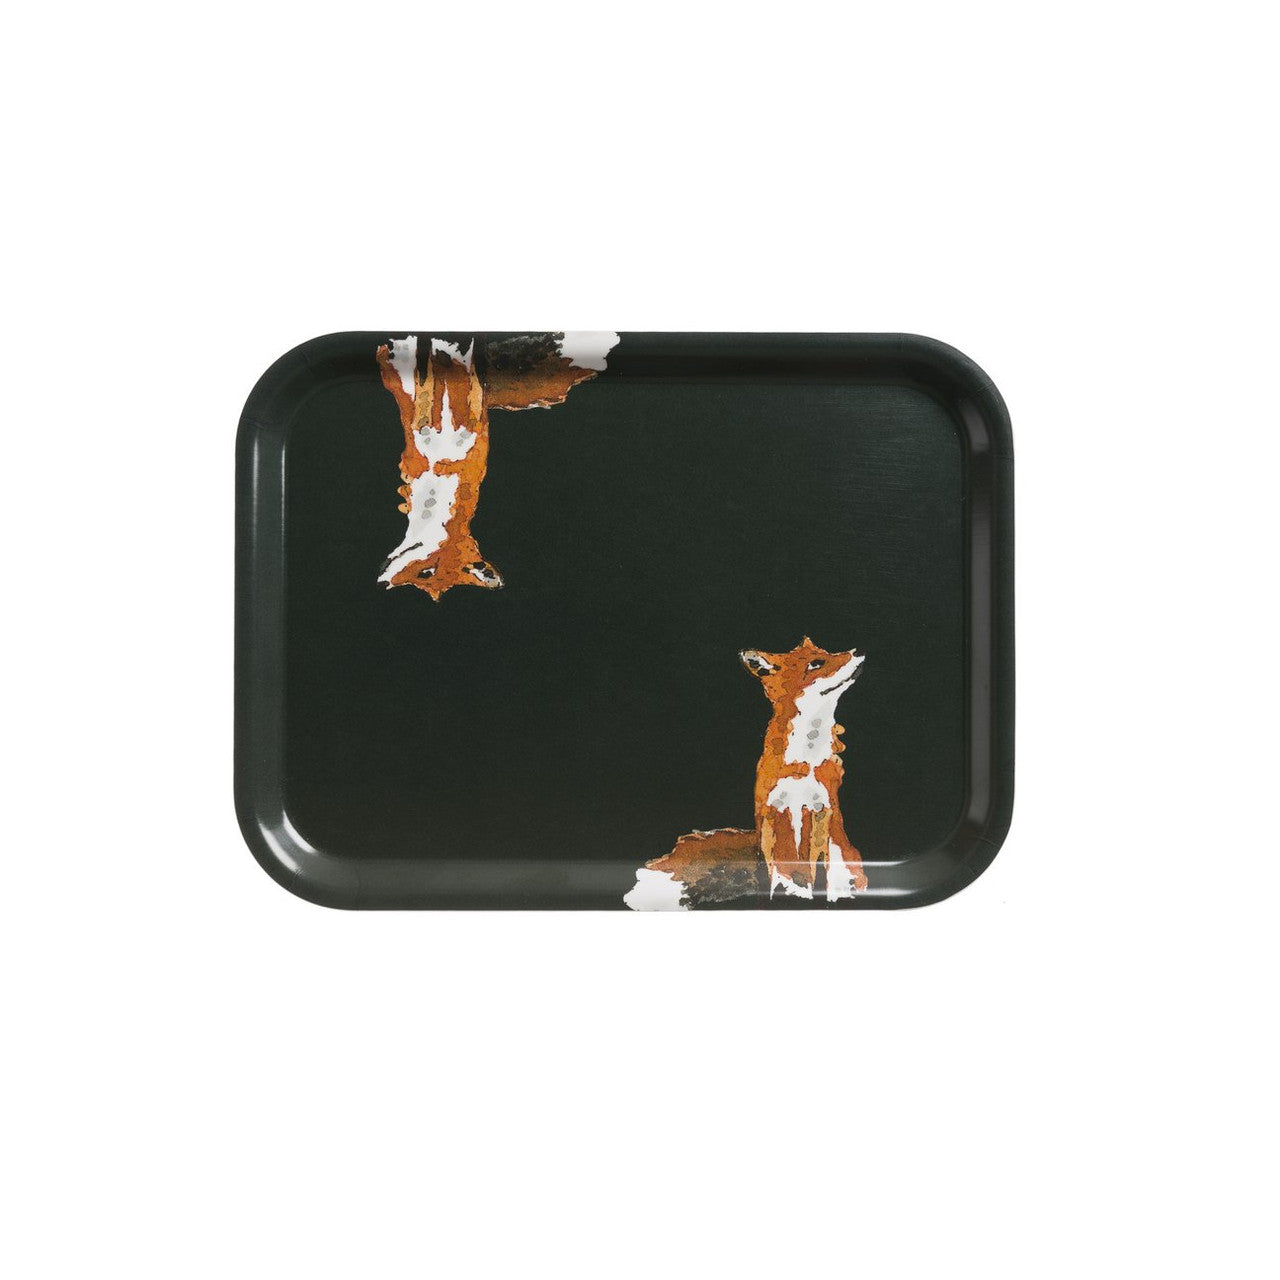 Birch foxes tray from Sophie Allport.